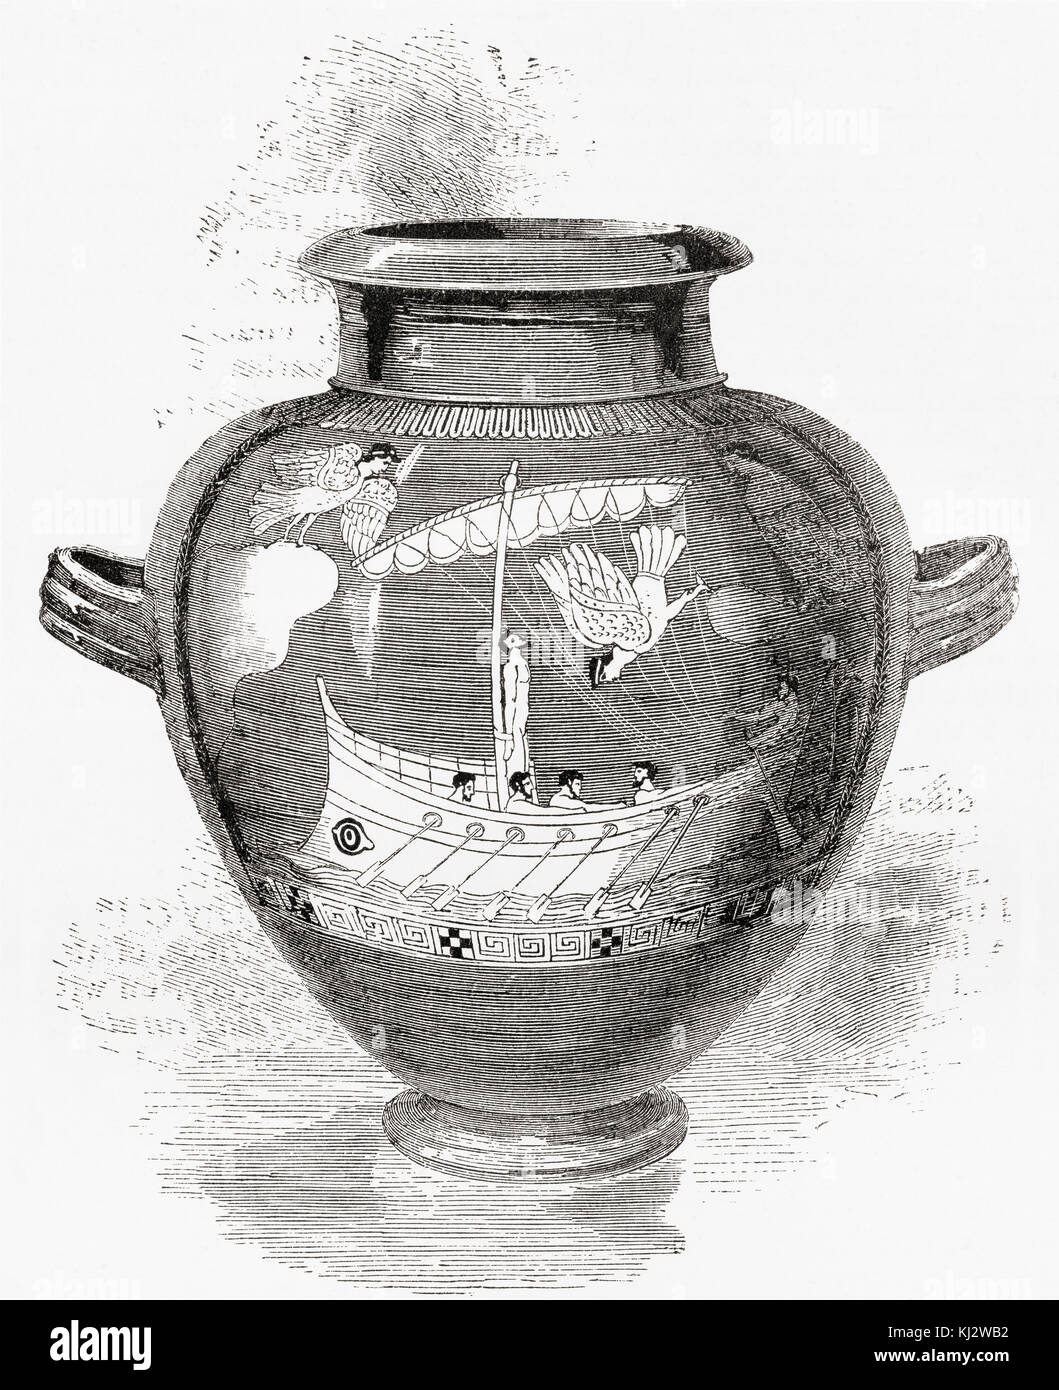 Etruscan Art.  Ancient vase representing the story of Ulysses and the Sirens.  From Ward and Lock's Illustrated History of the World, published c.1882. Stock Photo